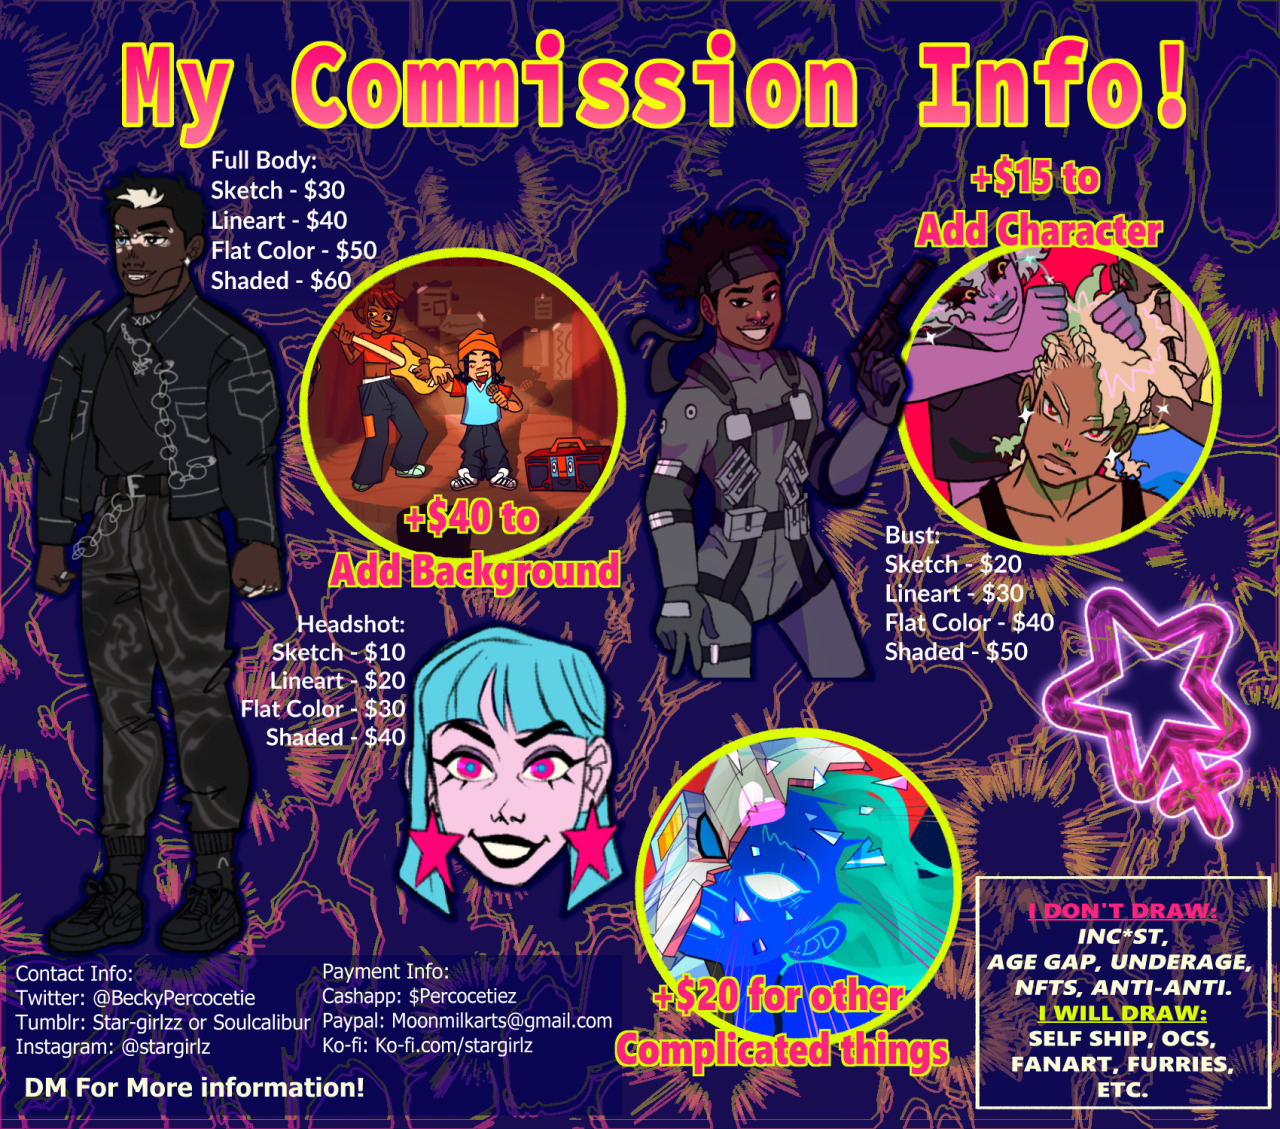 star-girlzz:
“star-girlzz:
“star-girlzz:
“star-girlzz:
“star-girlzz:
“star-girlzz:
“New Commission sheet! I’m in need of money atm so commissioning from me would be much appreciated!
”
Hi my friend is sick with cancer and needs a surgery we’re only...